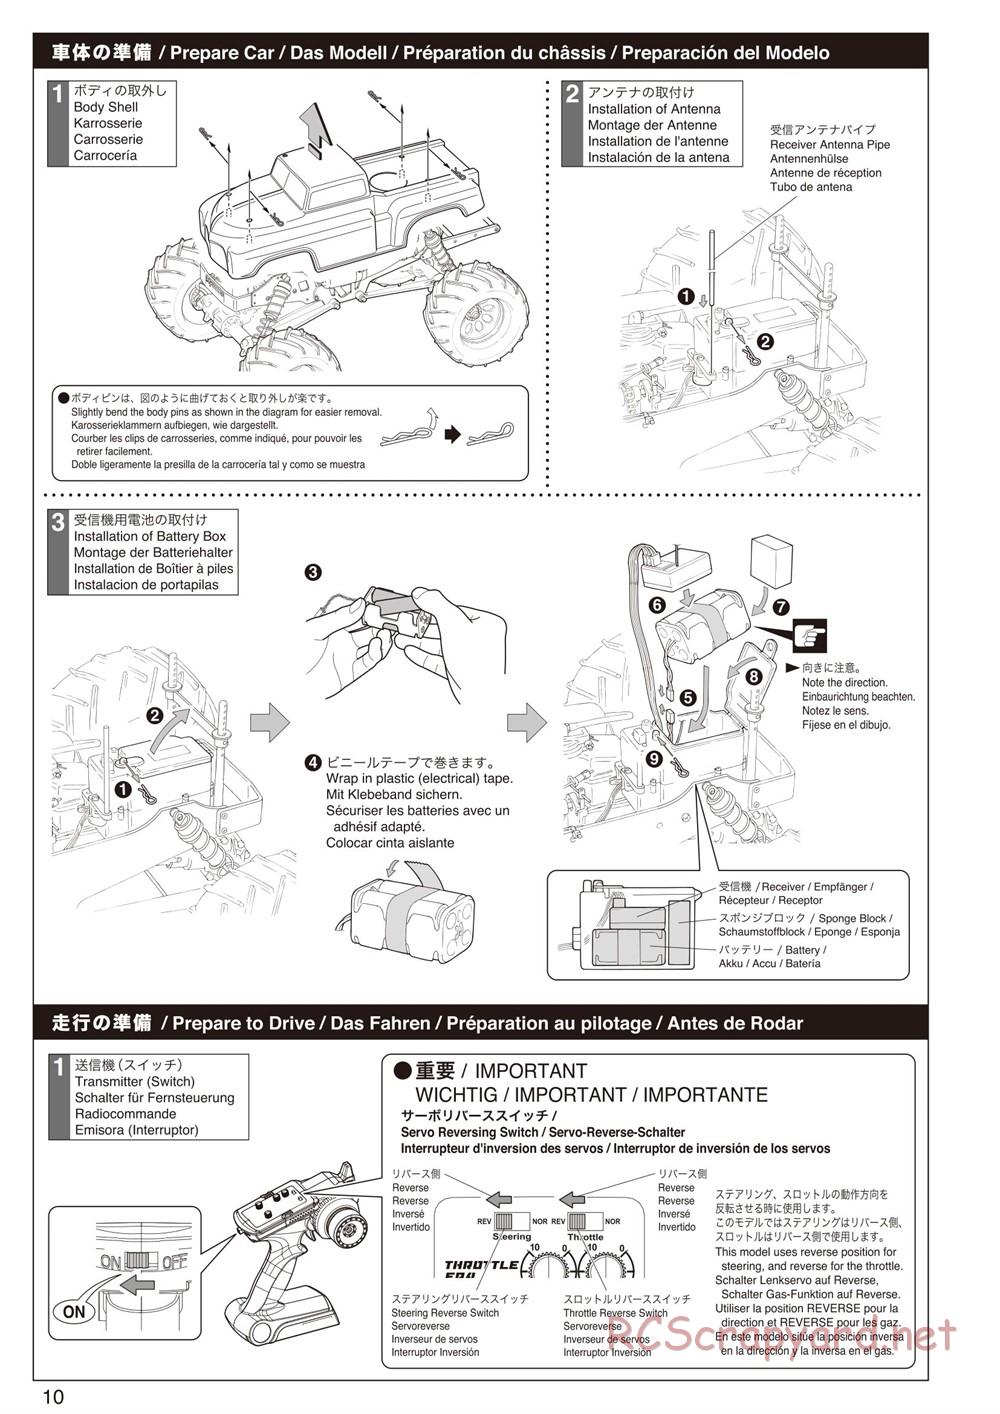 Kyosho - Mad Force Cruiser - Manual - Page 10